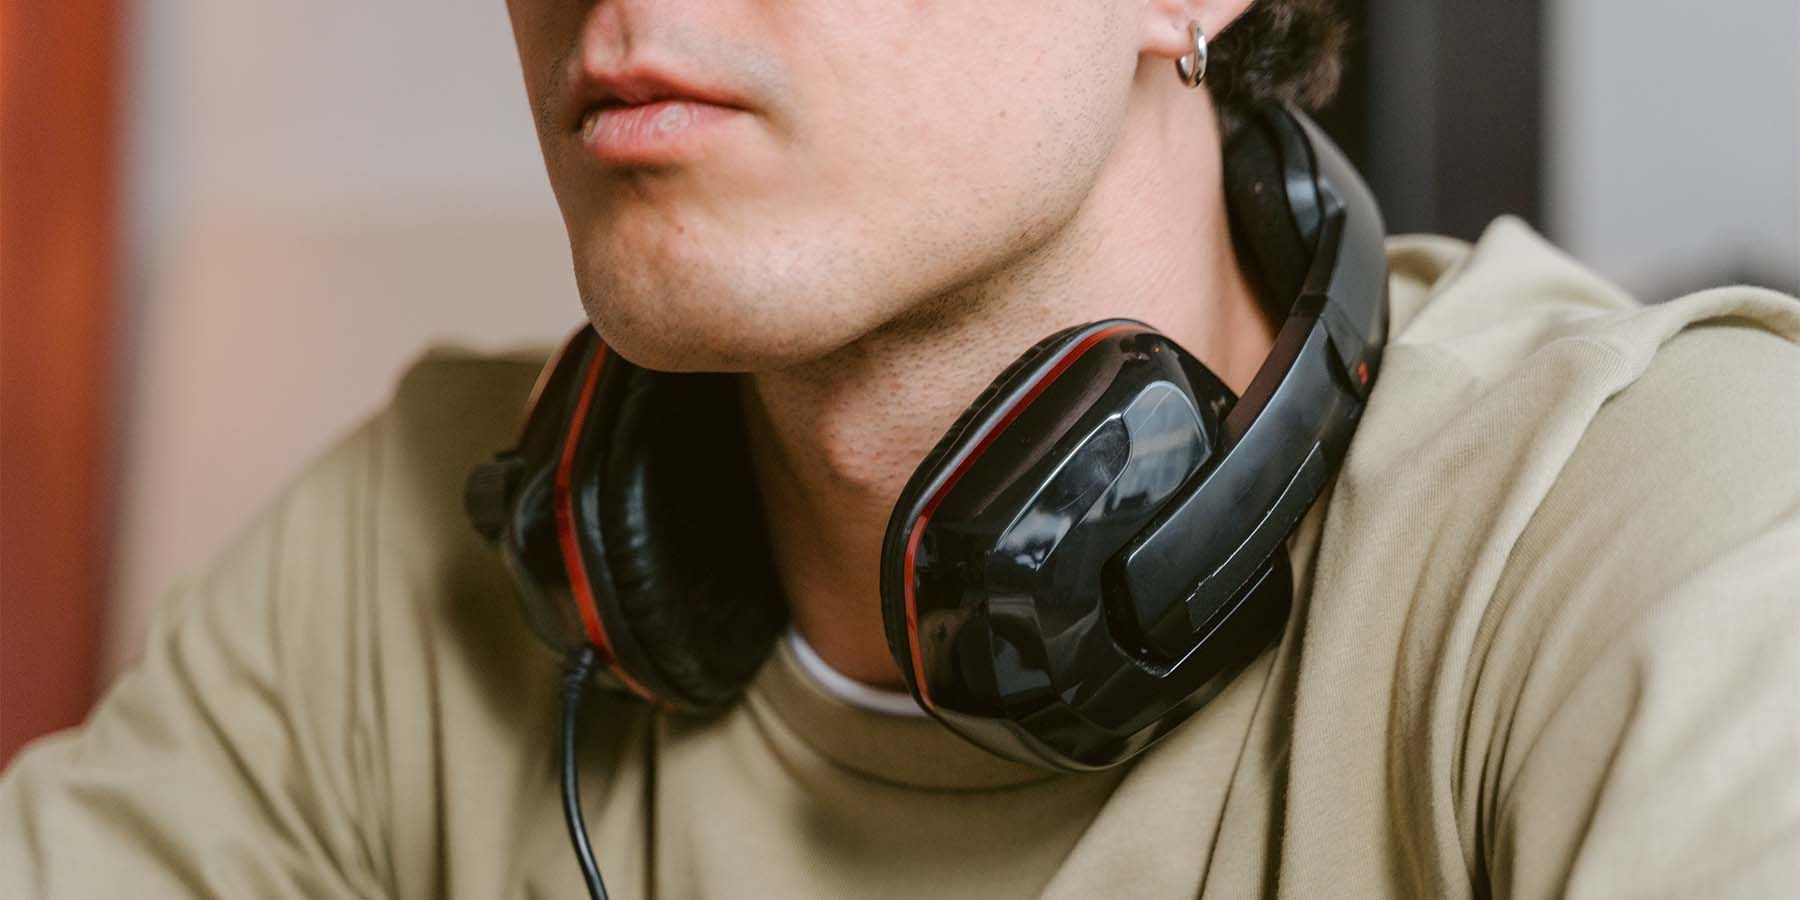 Pros and Cons of Wired and Wireless Headsets